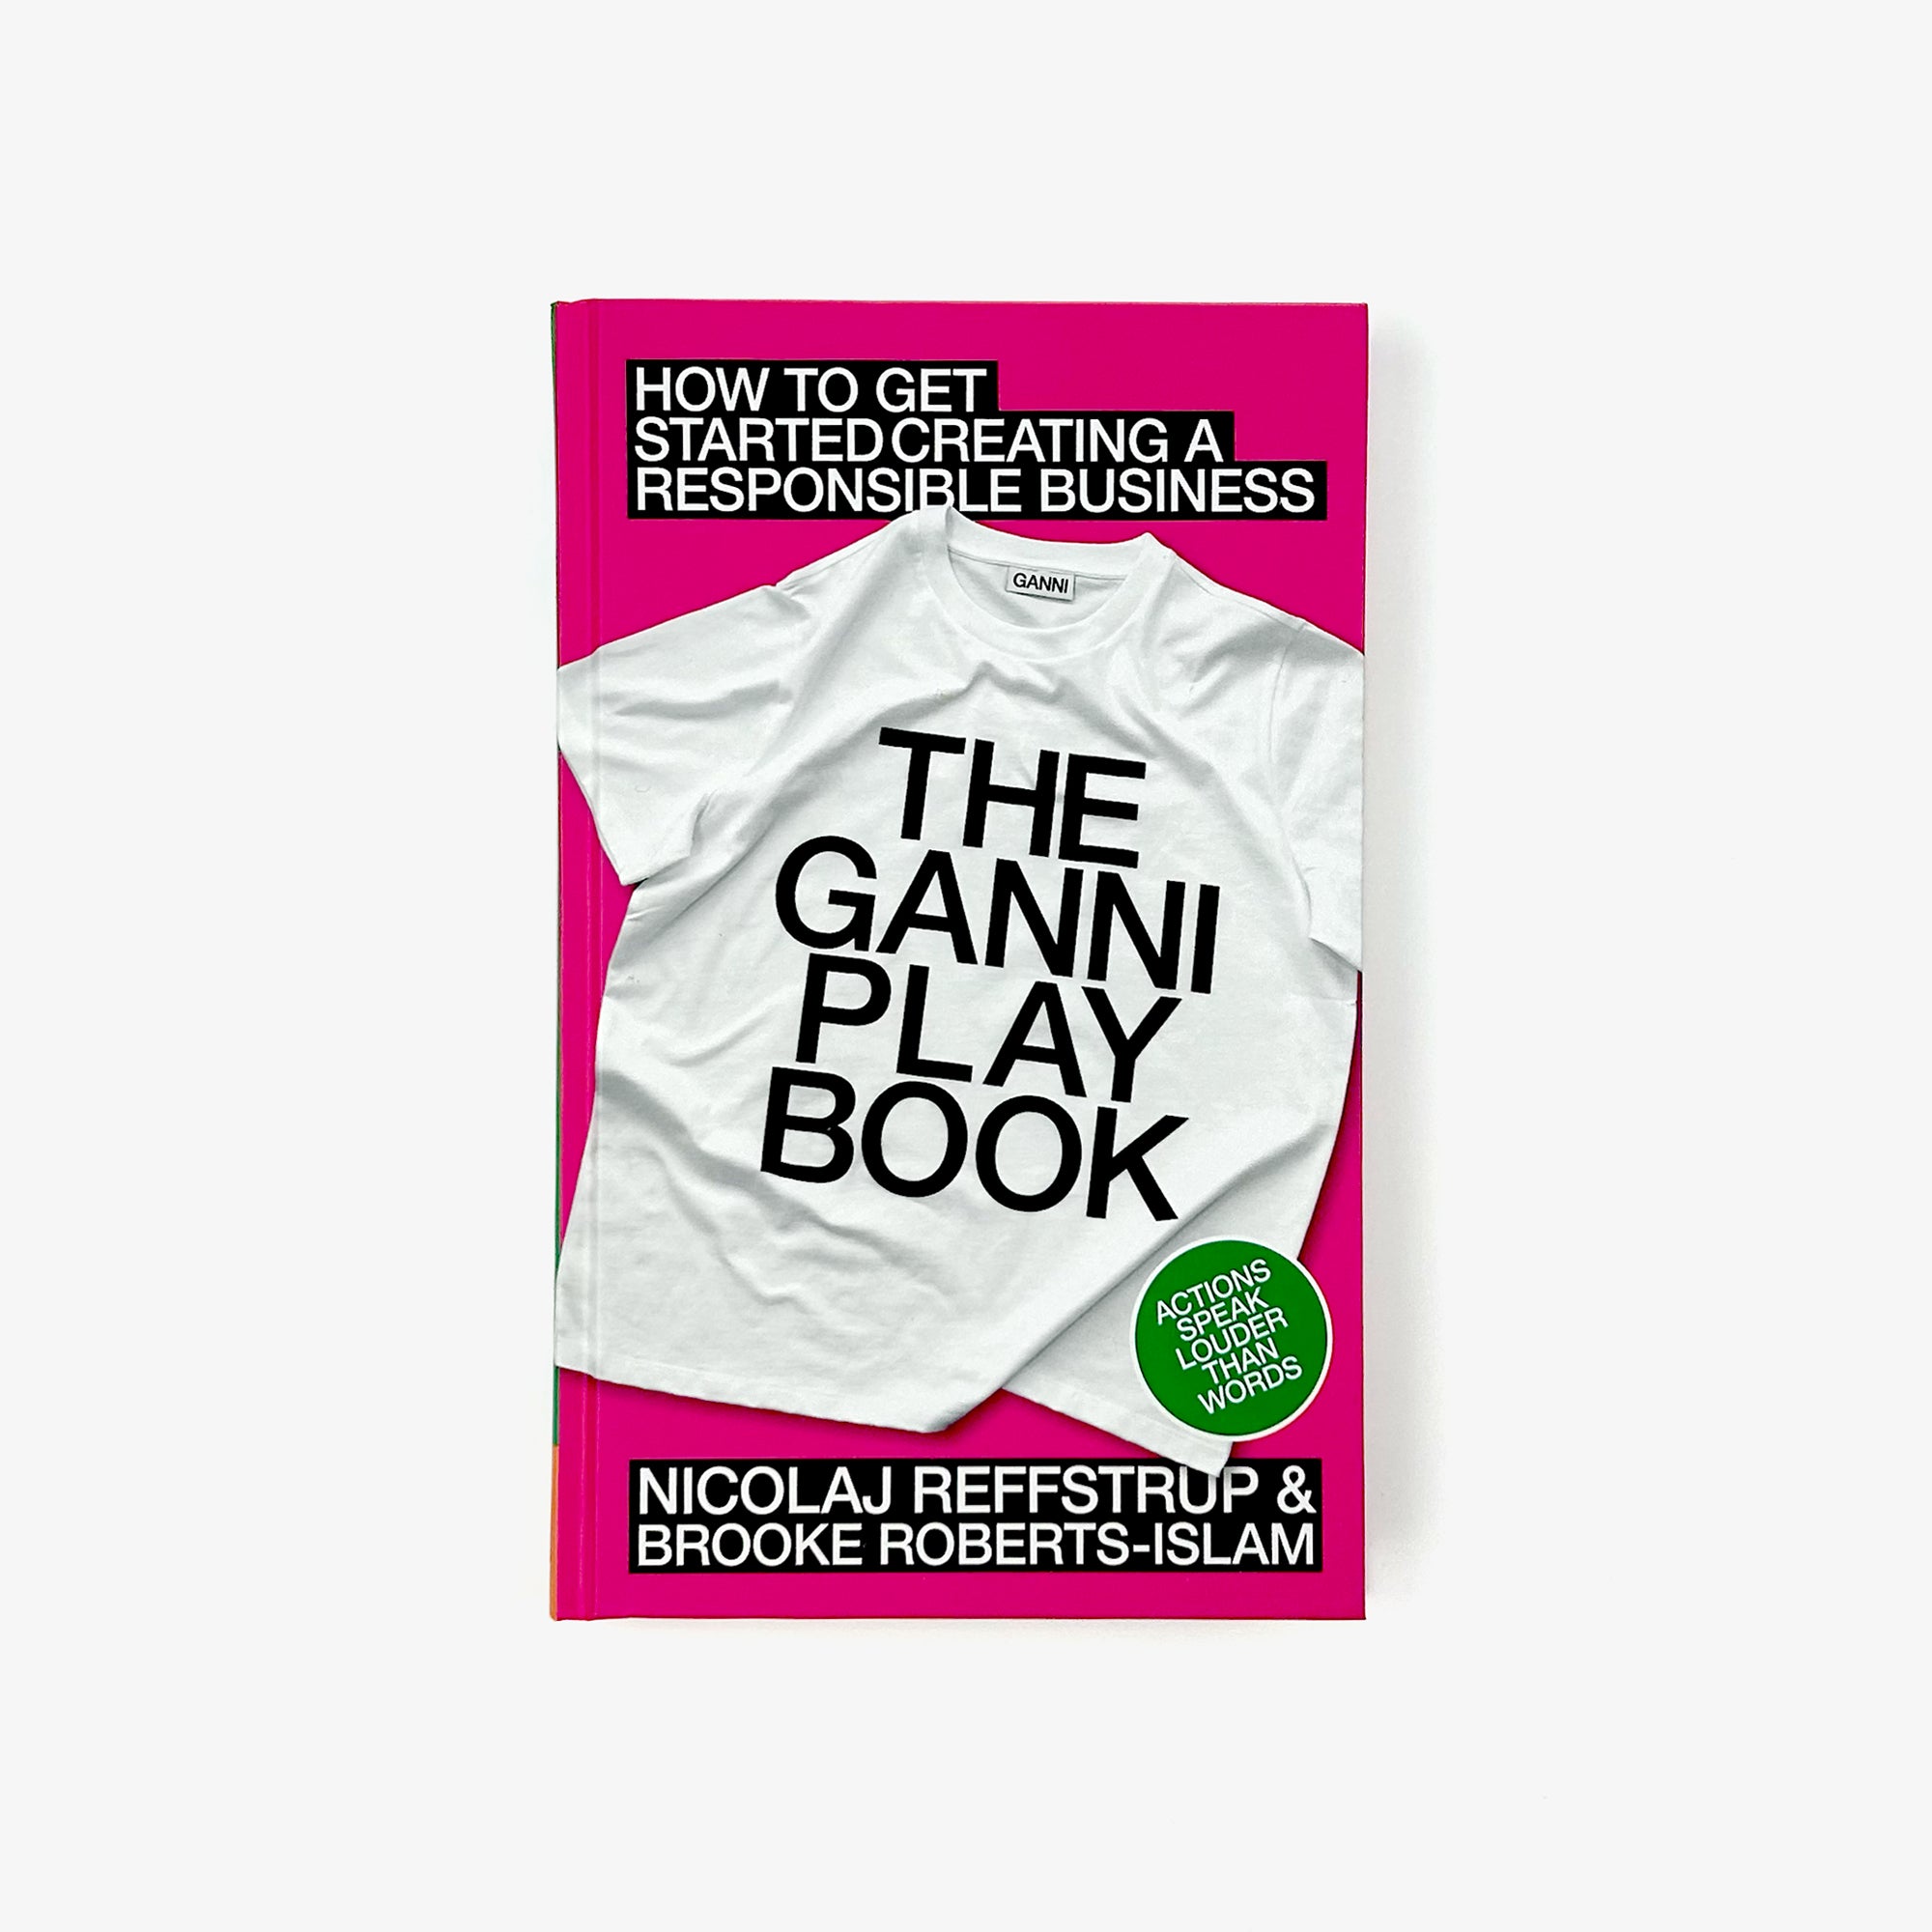 The GANNI Playbook: How to Get Started Creating a Responsible Business